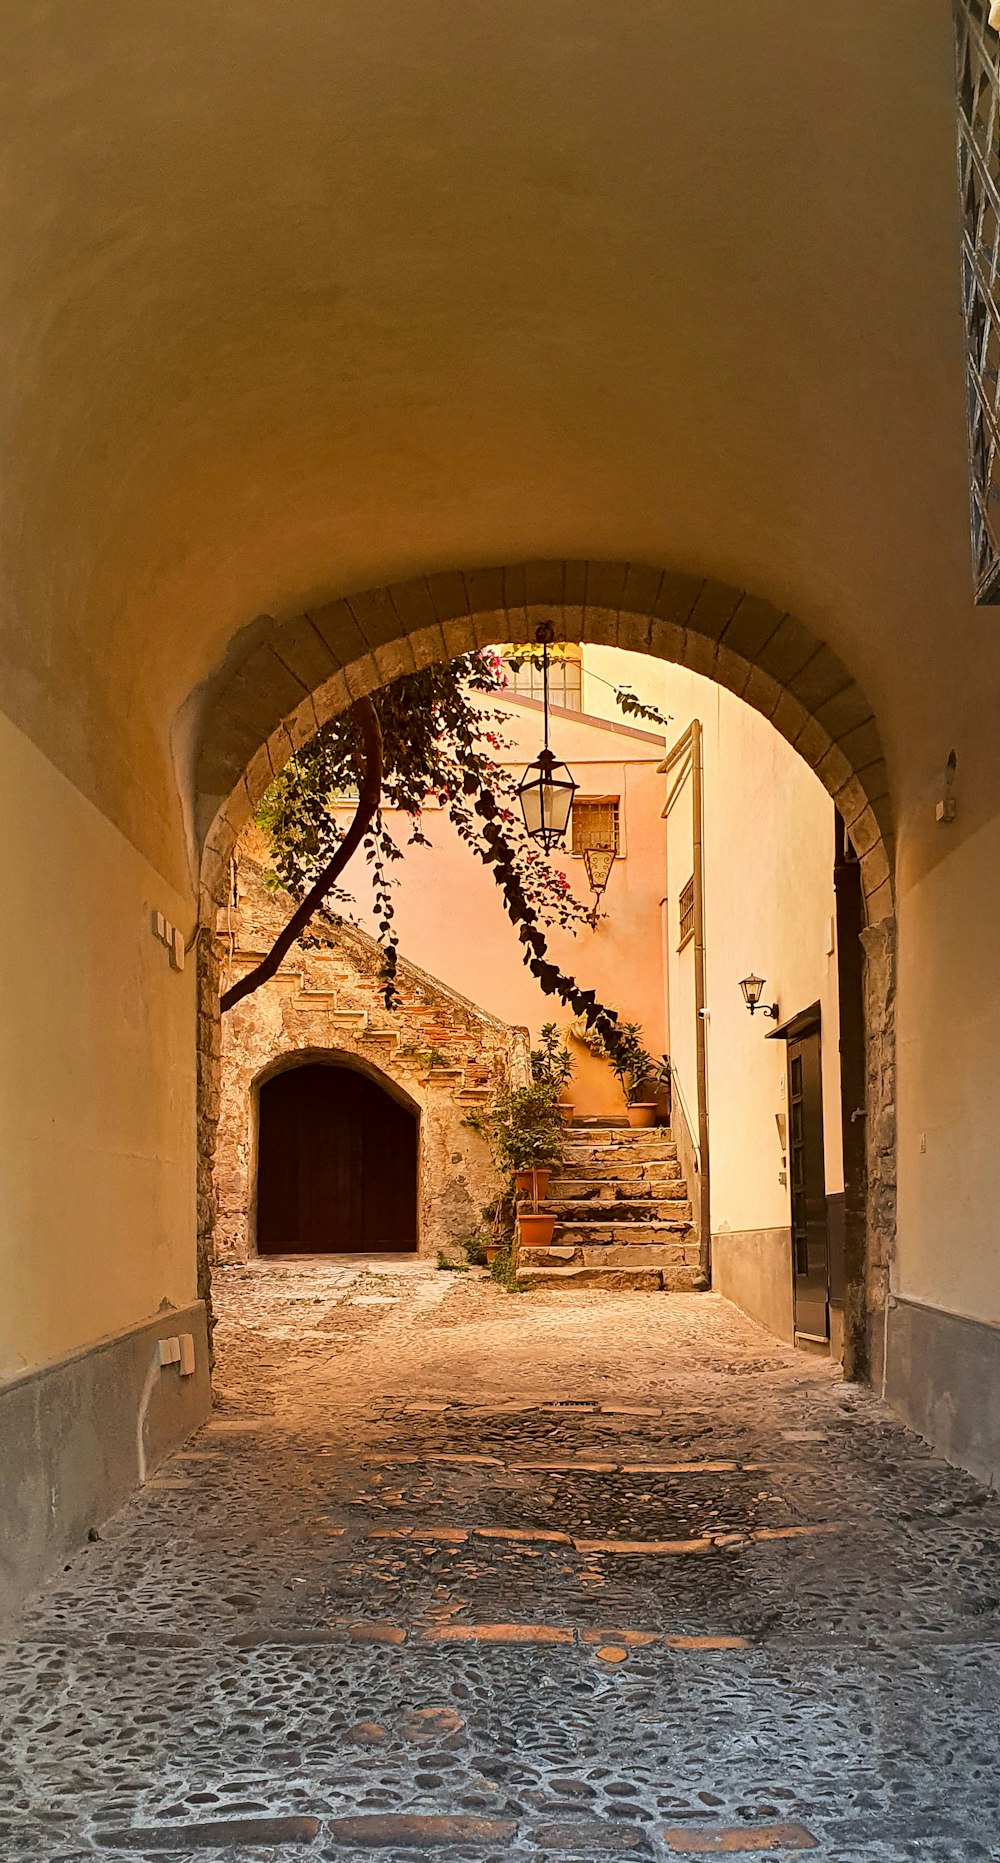 a cobblestone street with a stone arch leading into a tunnel